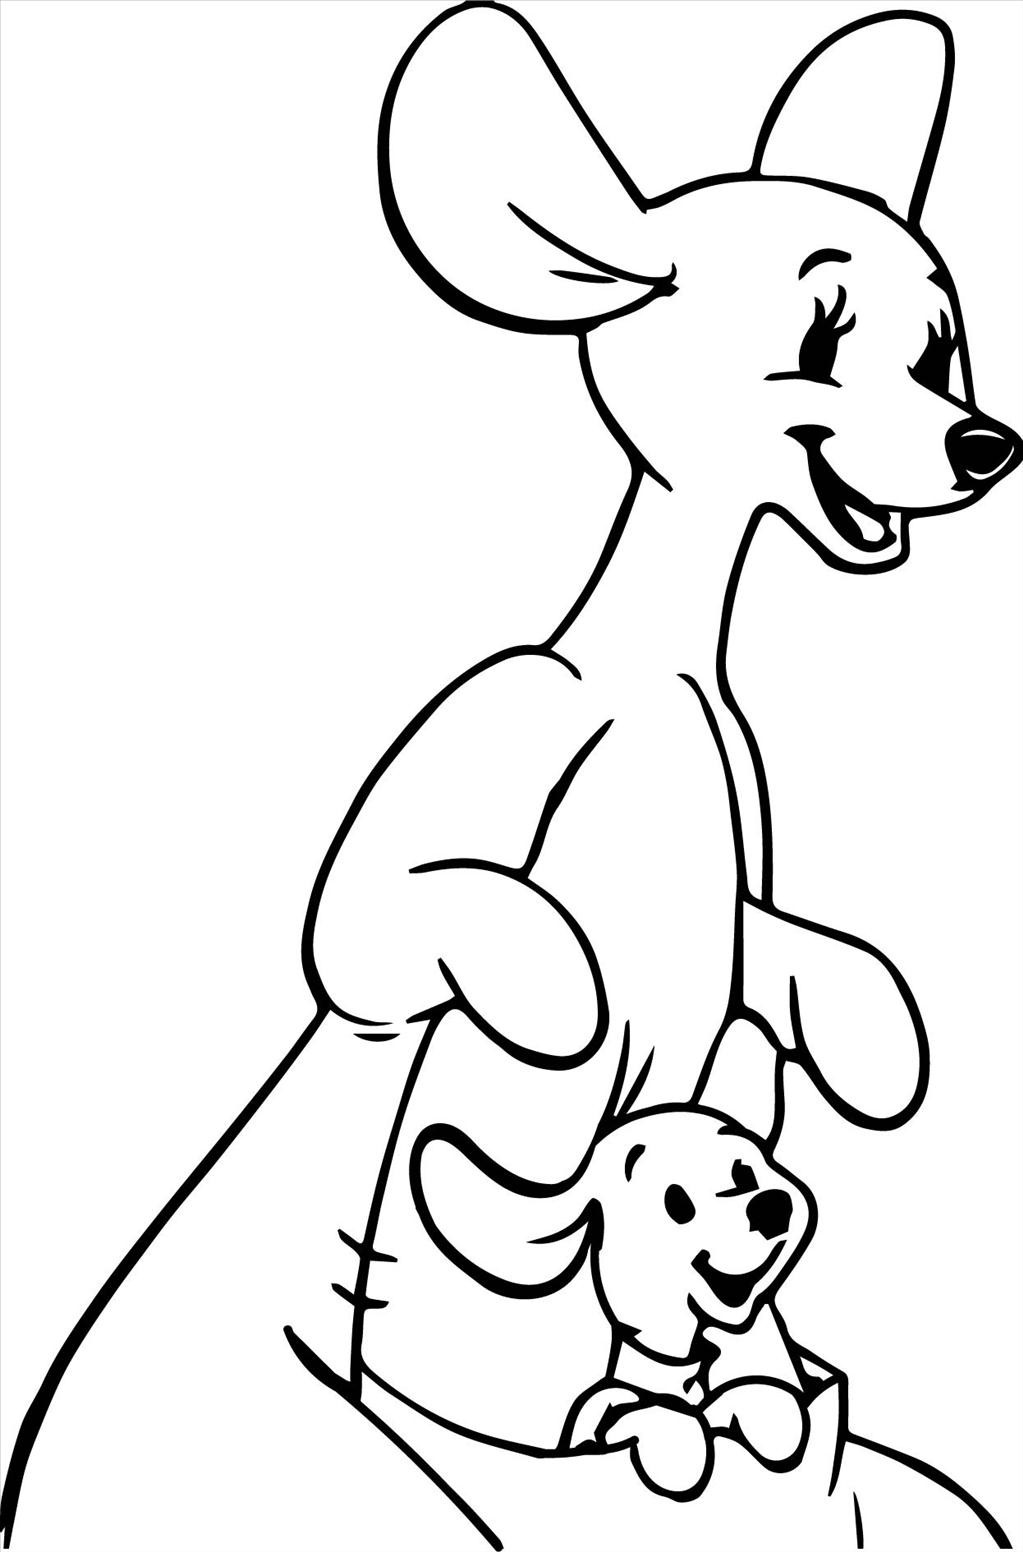 kangaroo-coloring-pages-for-kids-at-getcolorings-free-printable